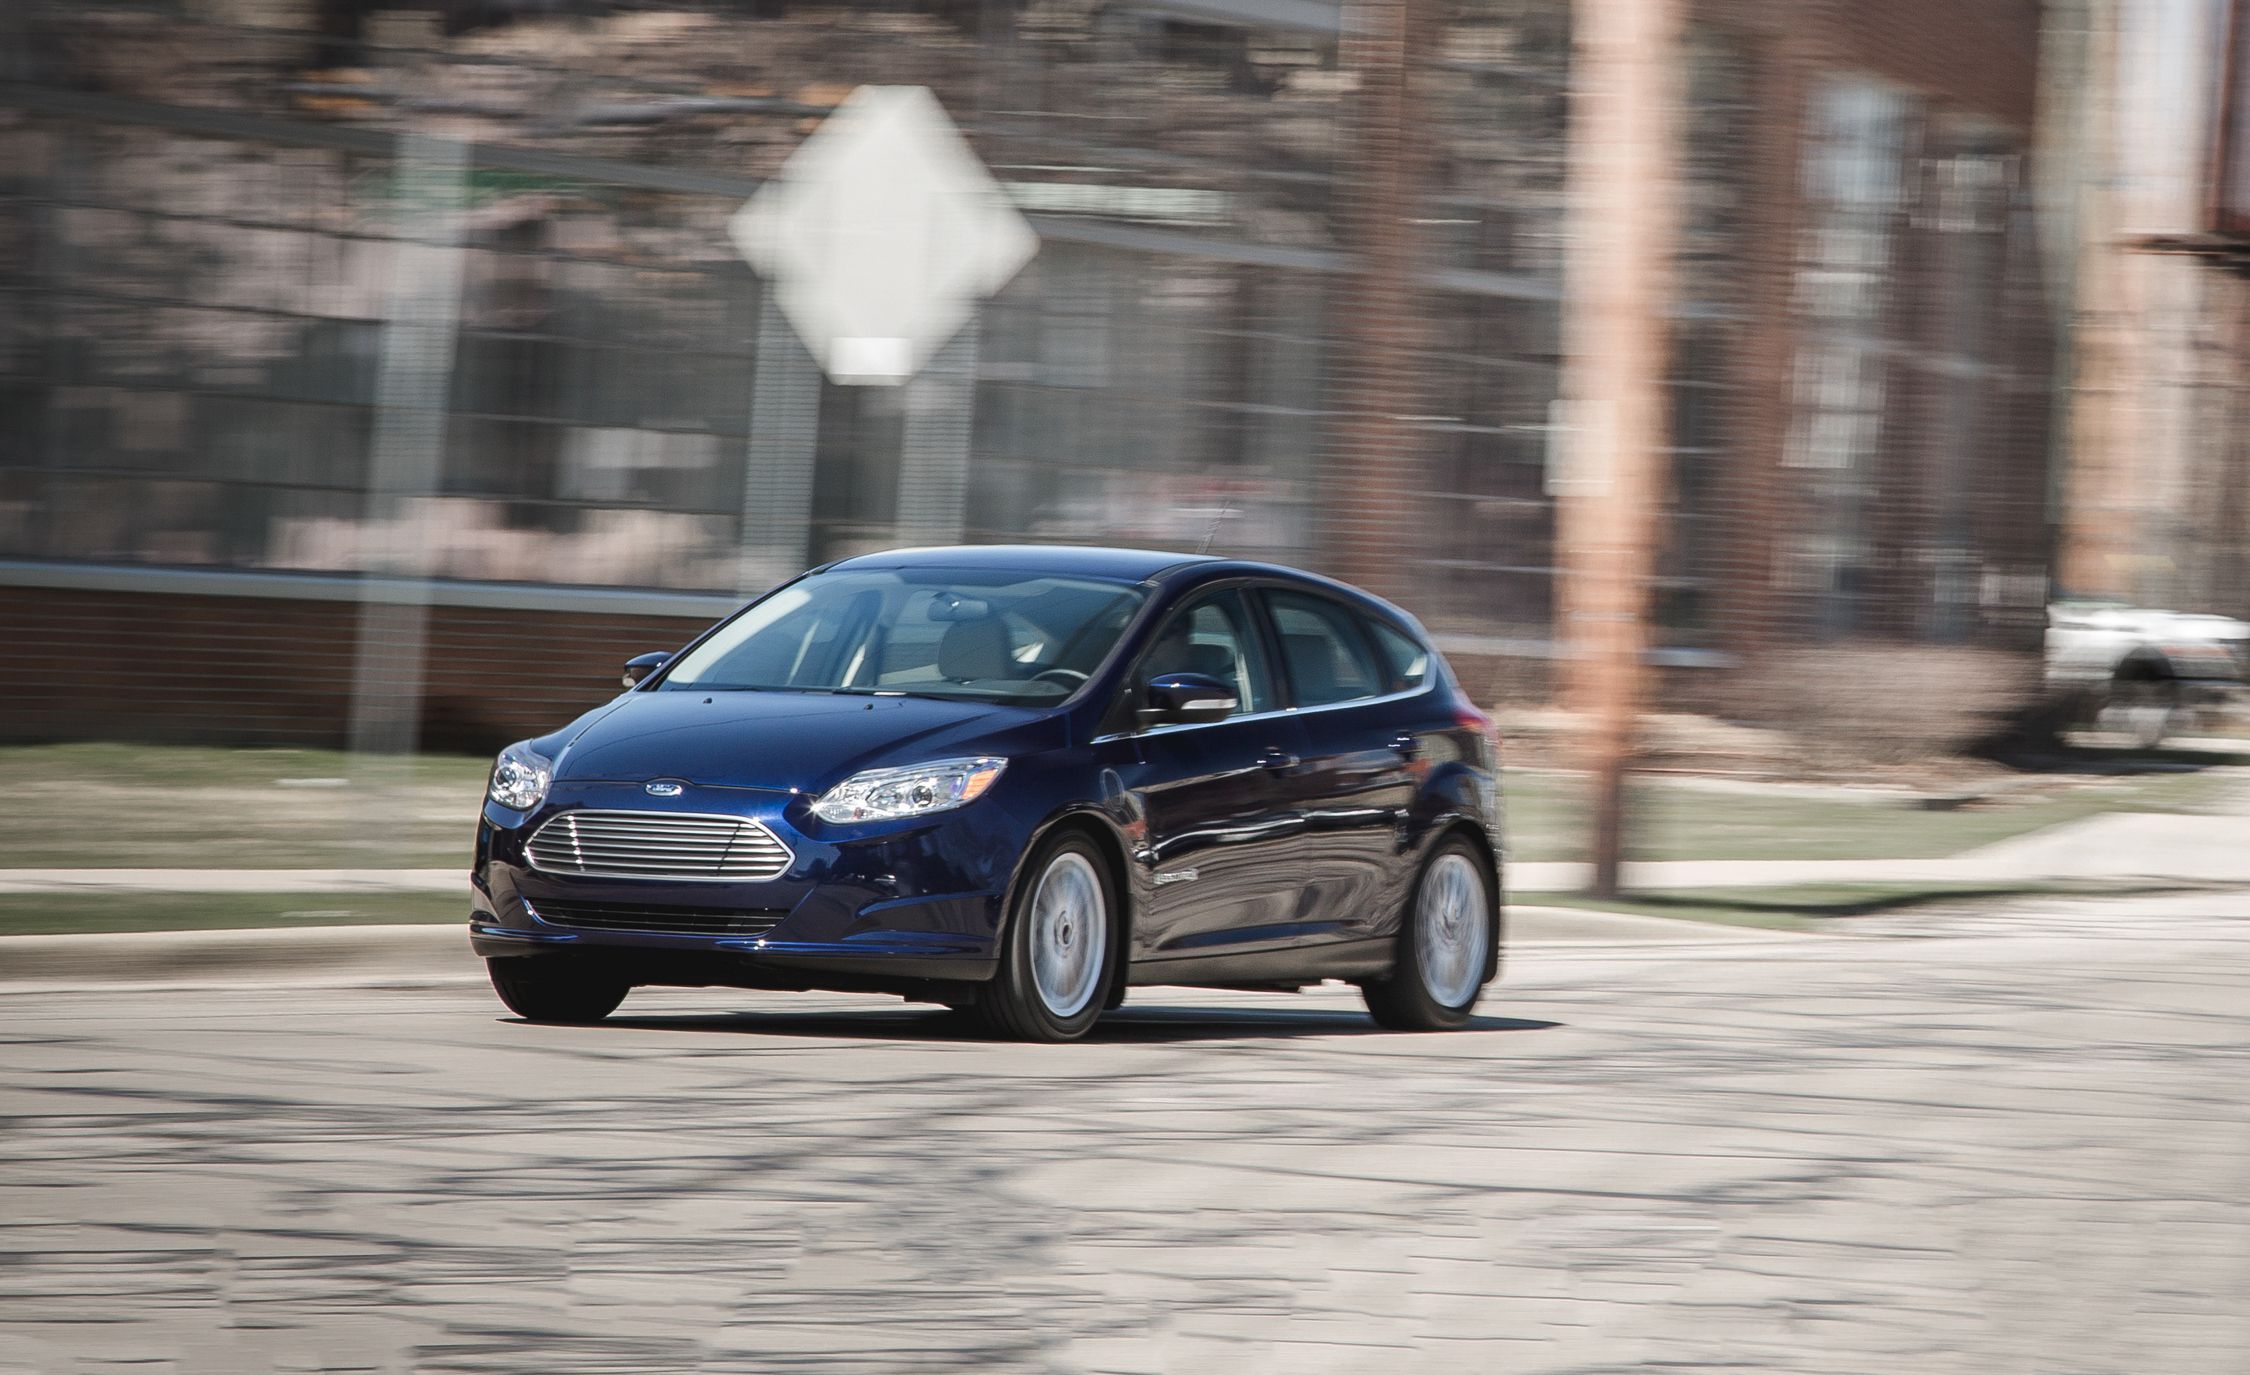 2018 Ford Focus Electric Research, photos, specs, and expertise